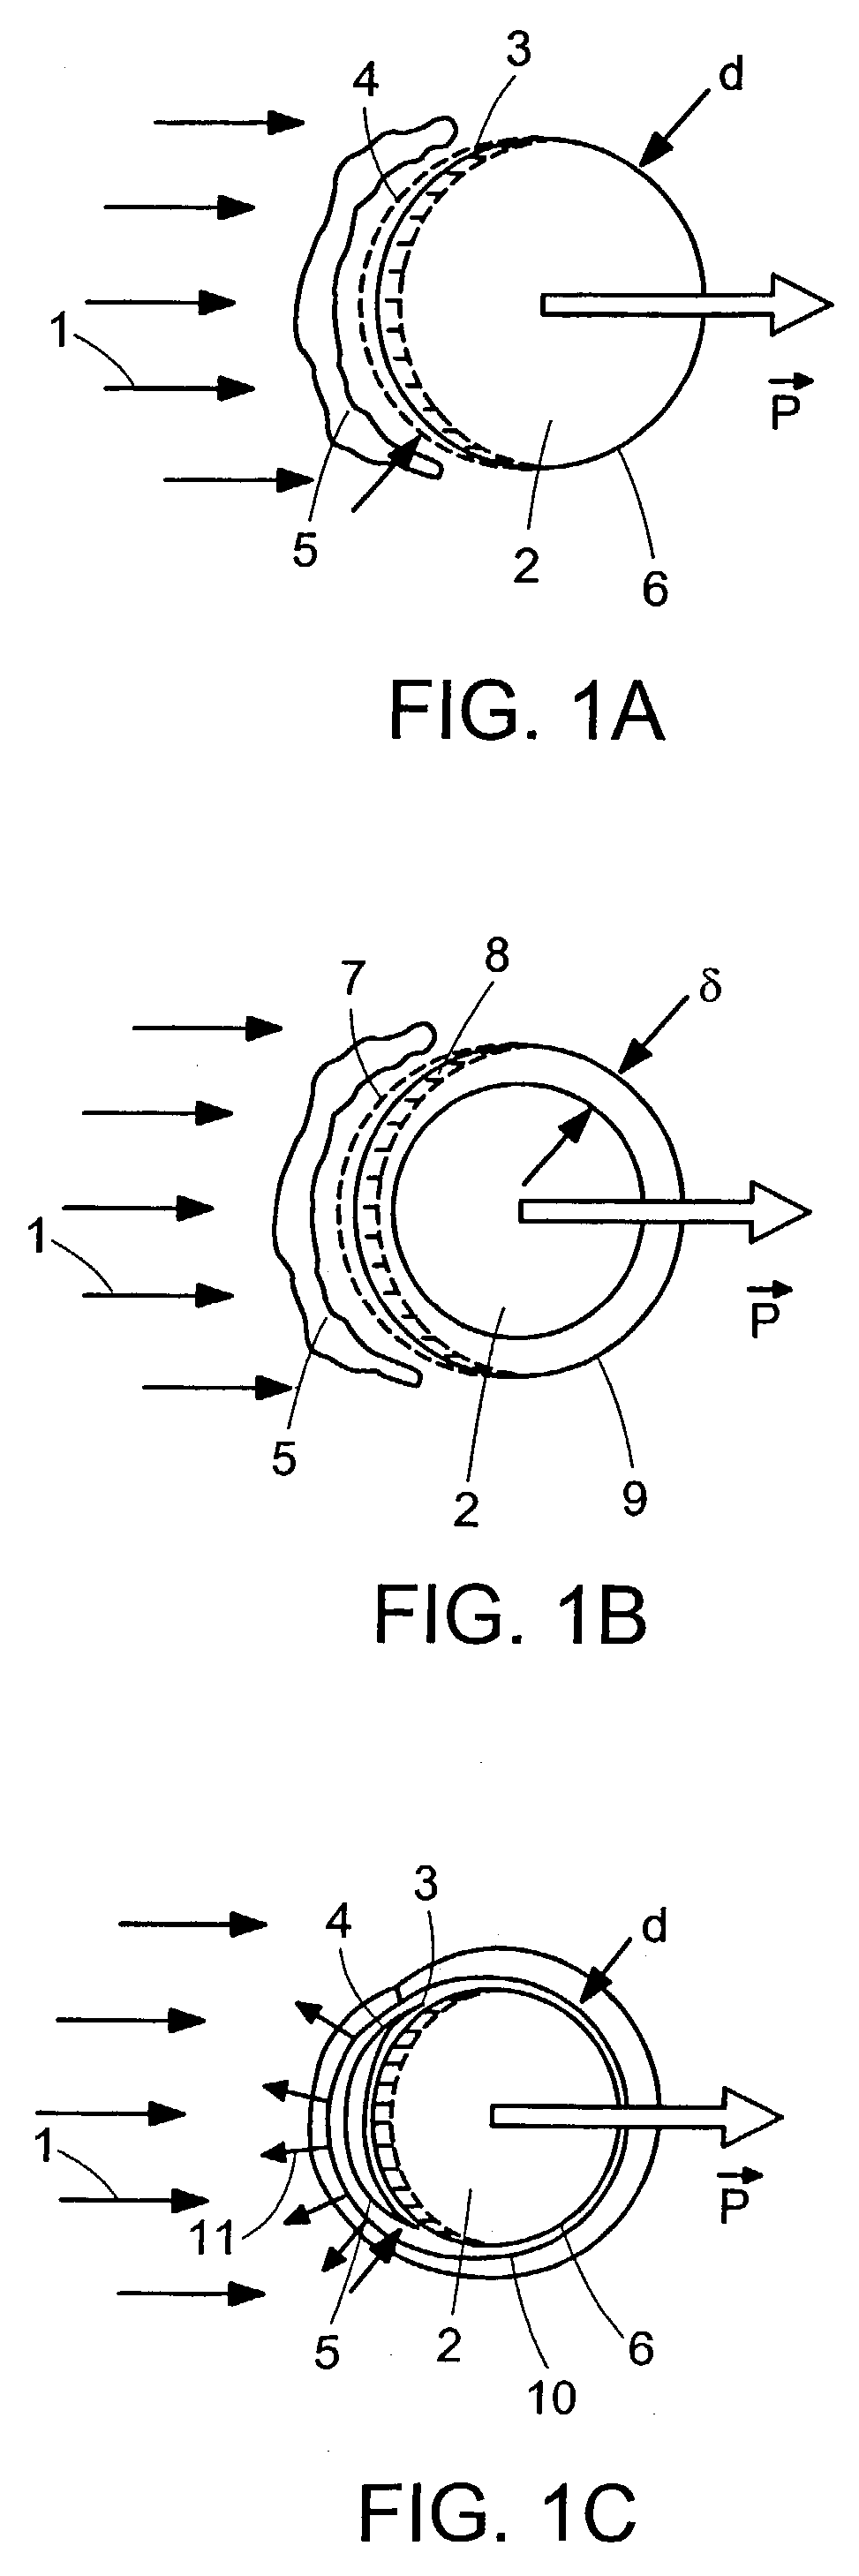 Methods and apparatus for light induced processing of biological tissues and of dental materials